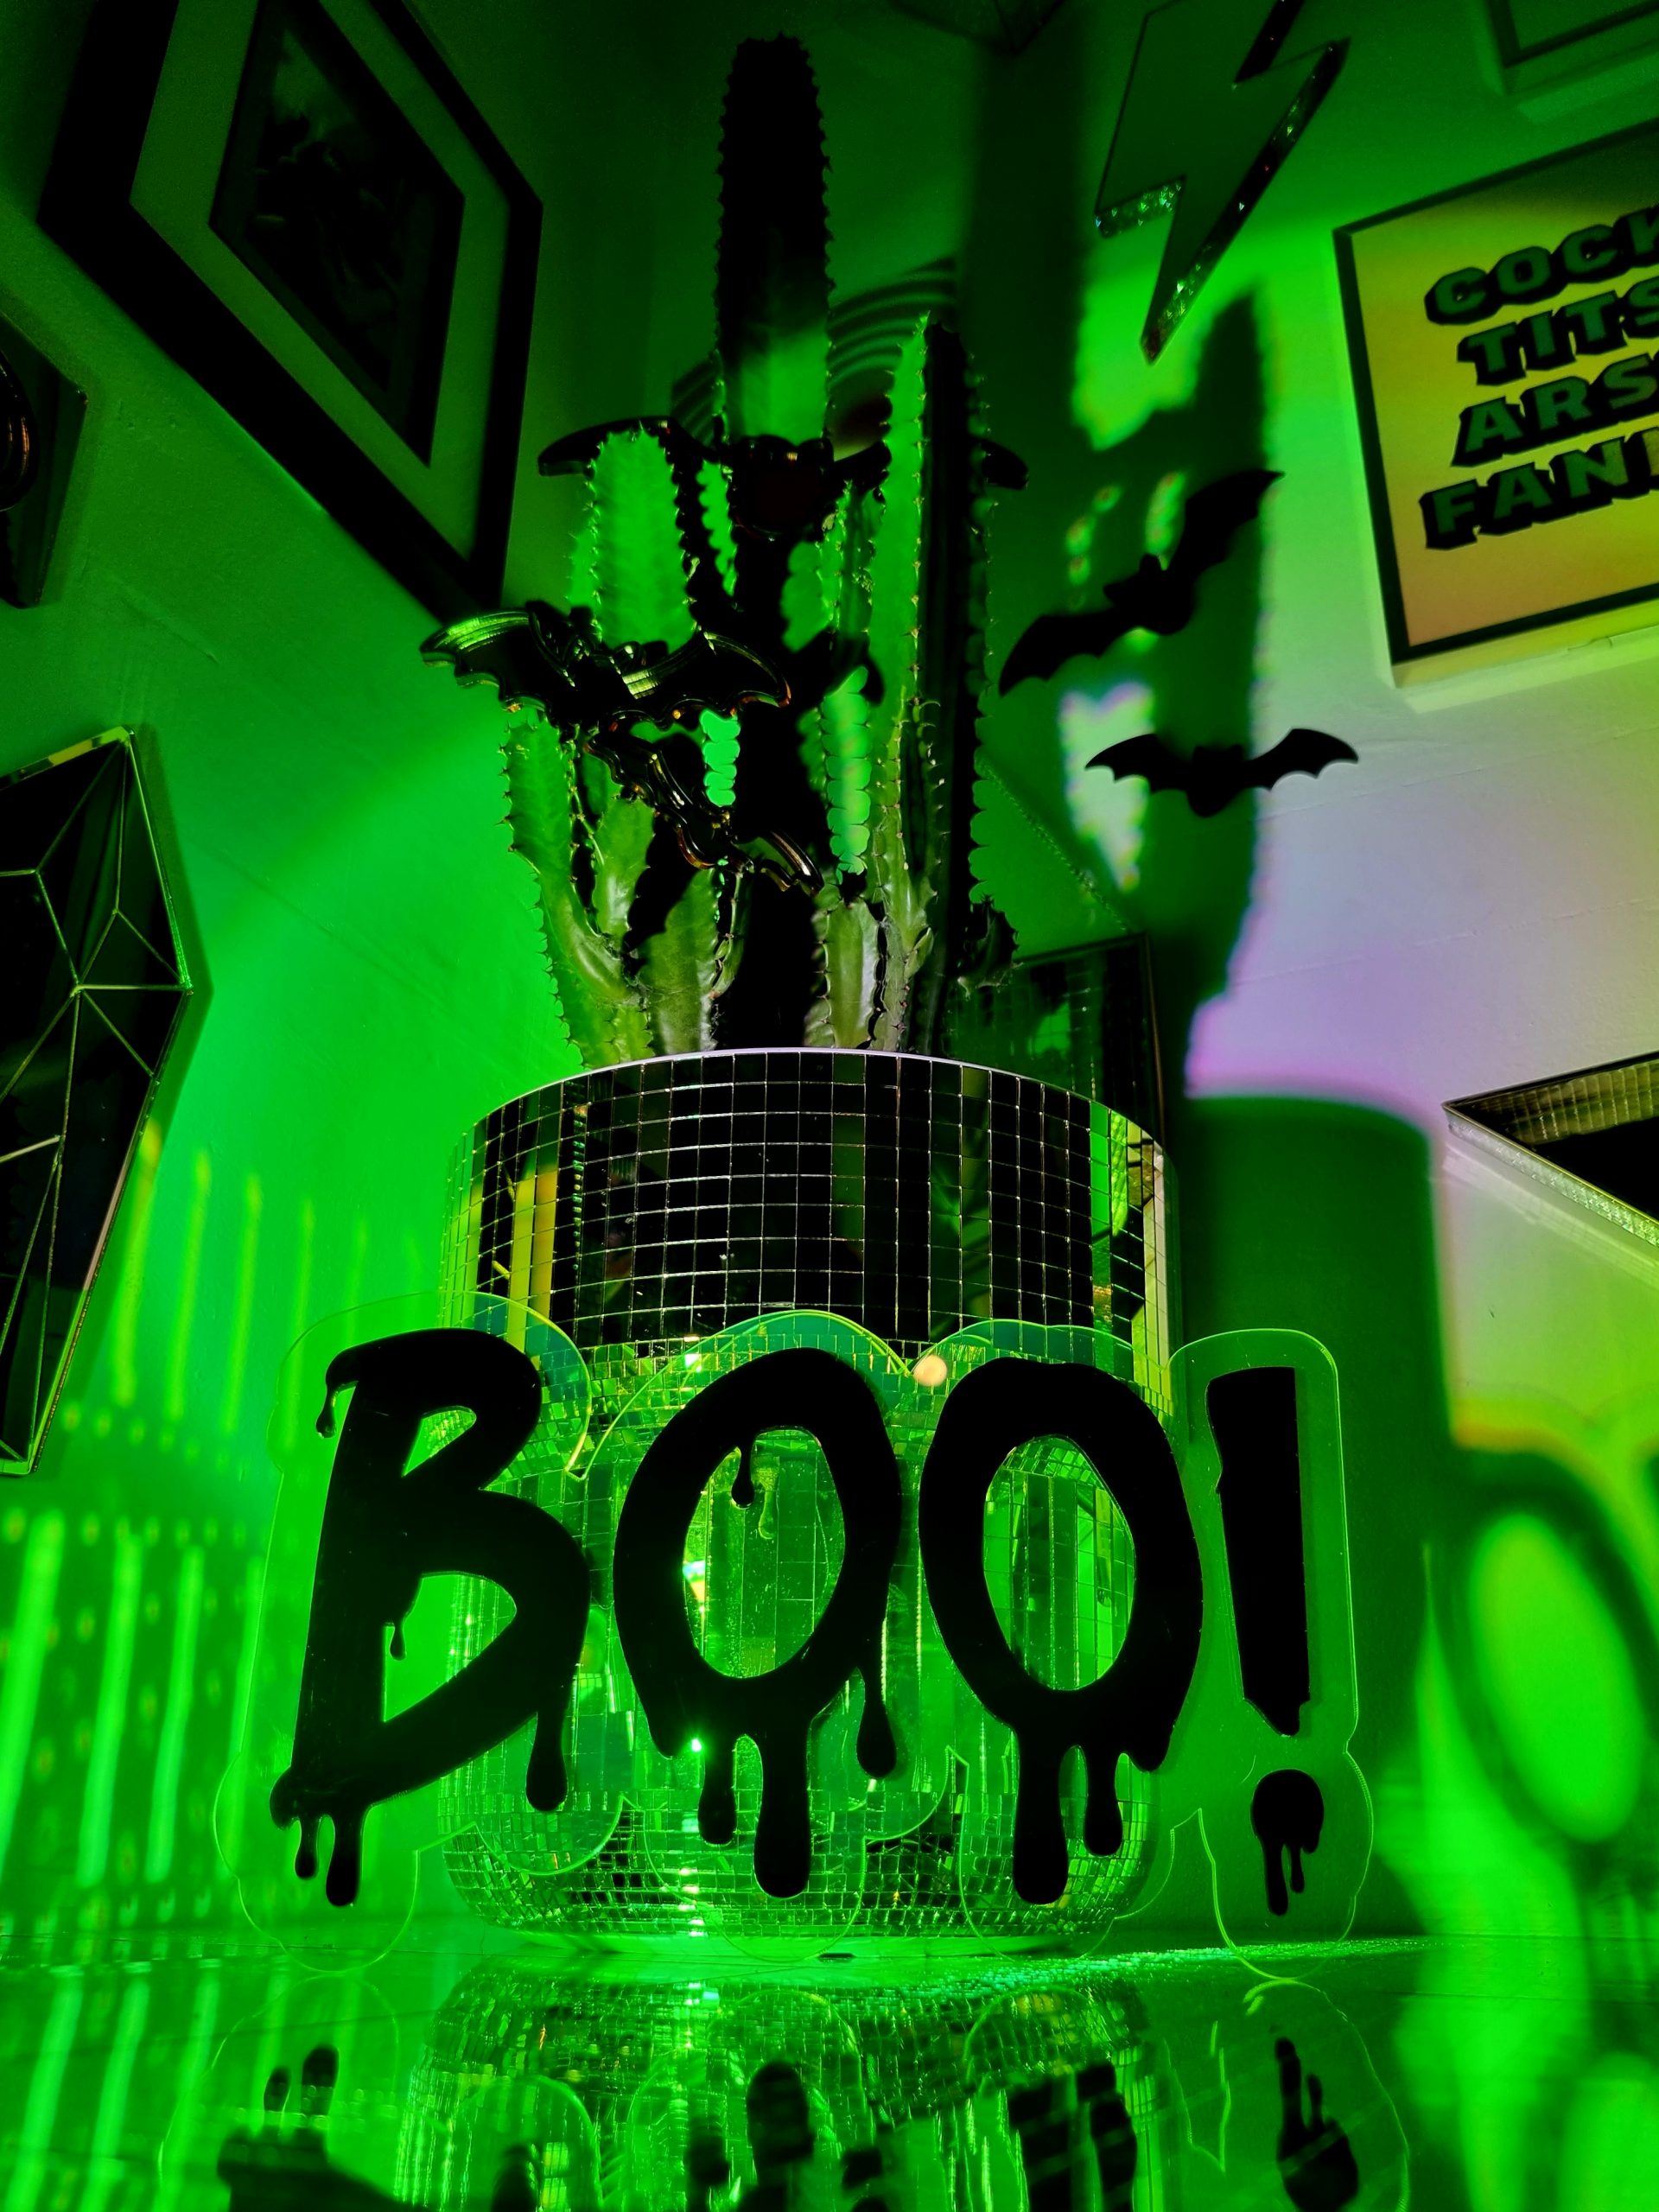 Neon green wall decor with the word Boo made in a dripping font.